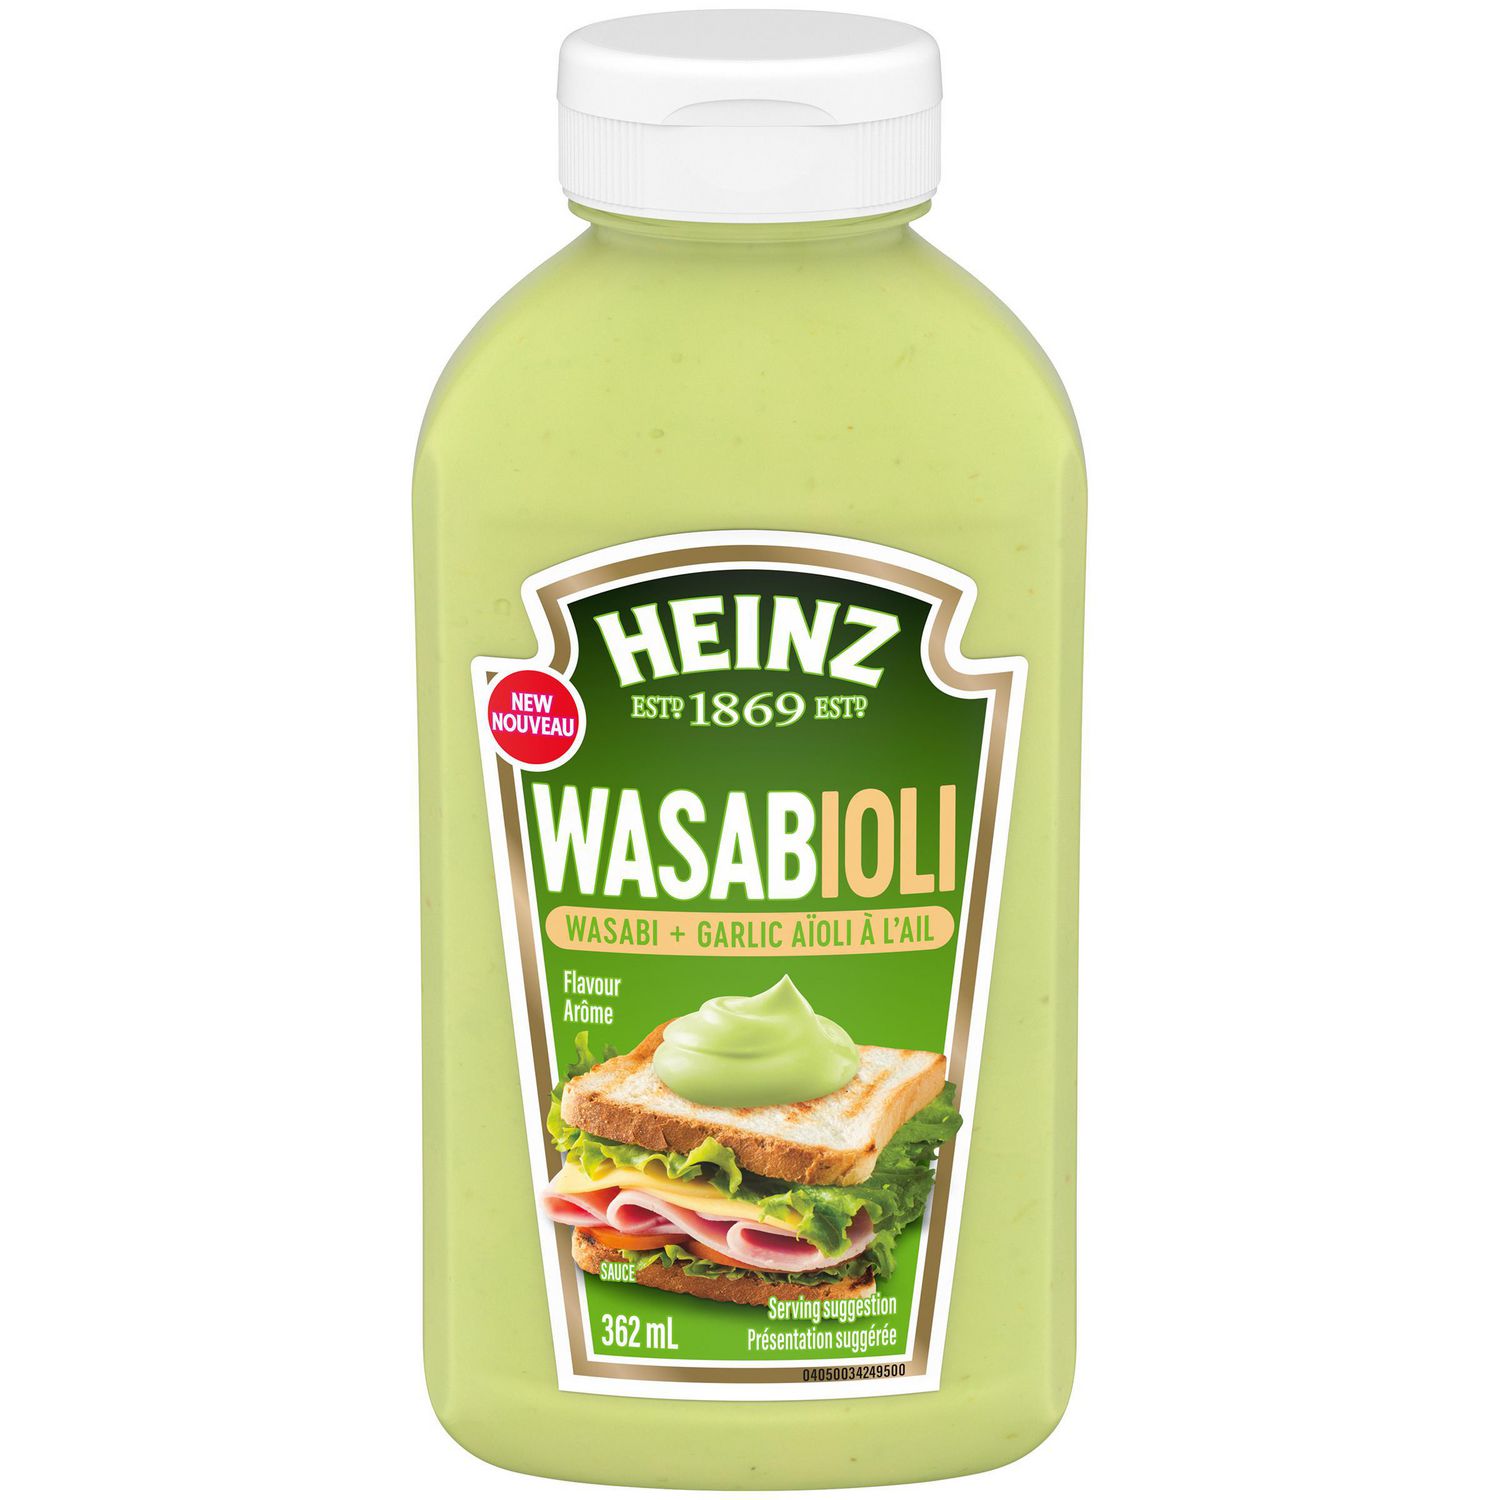 Each 362ml bottle of our new condiment flavour offers a delicious combinati...